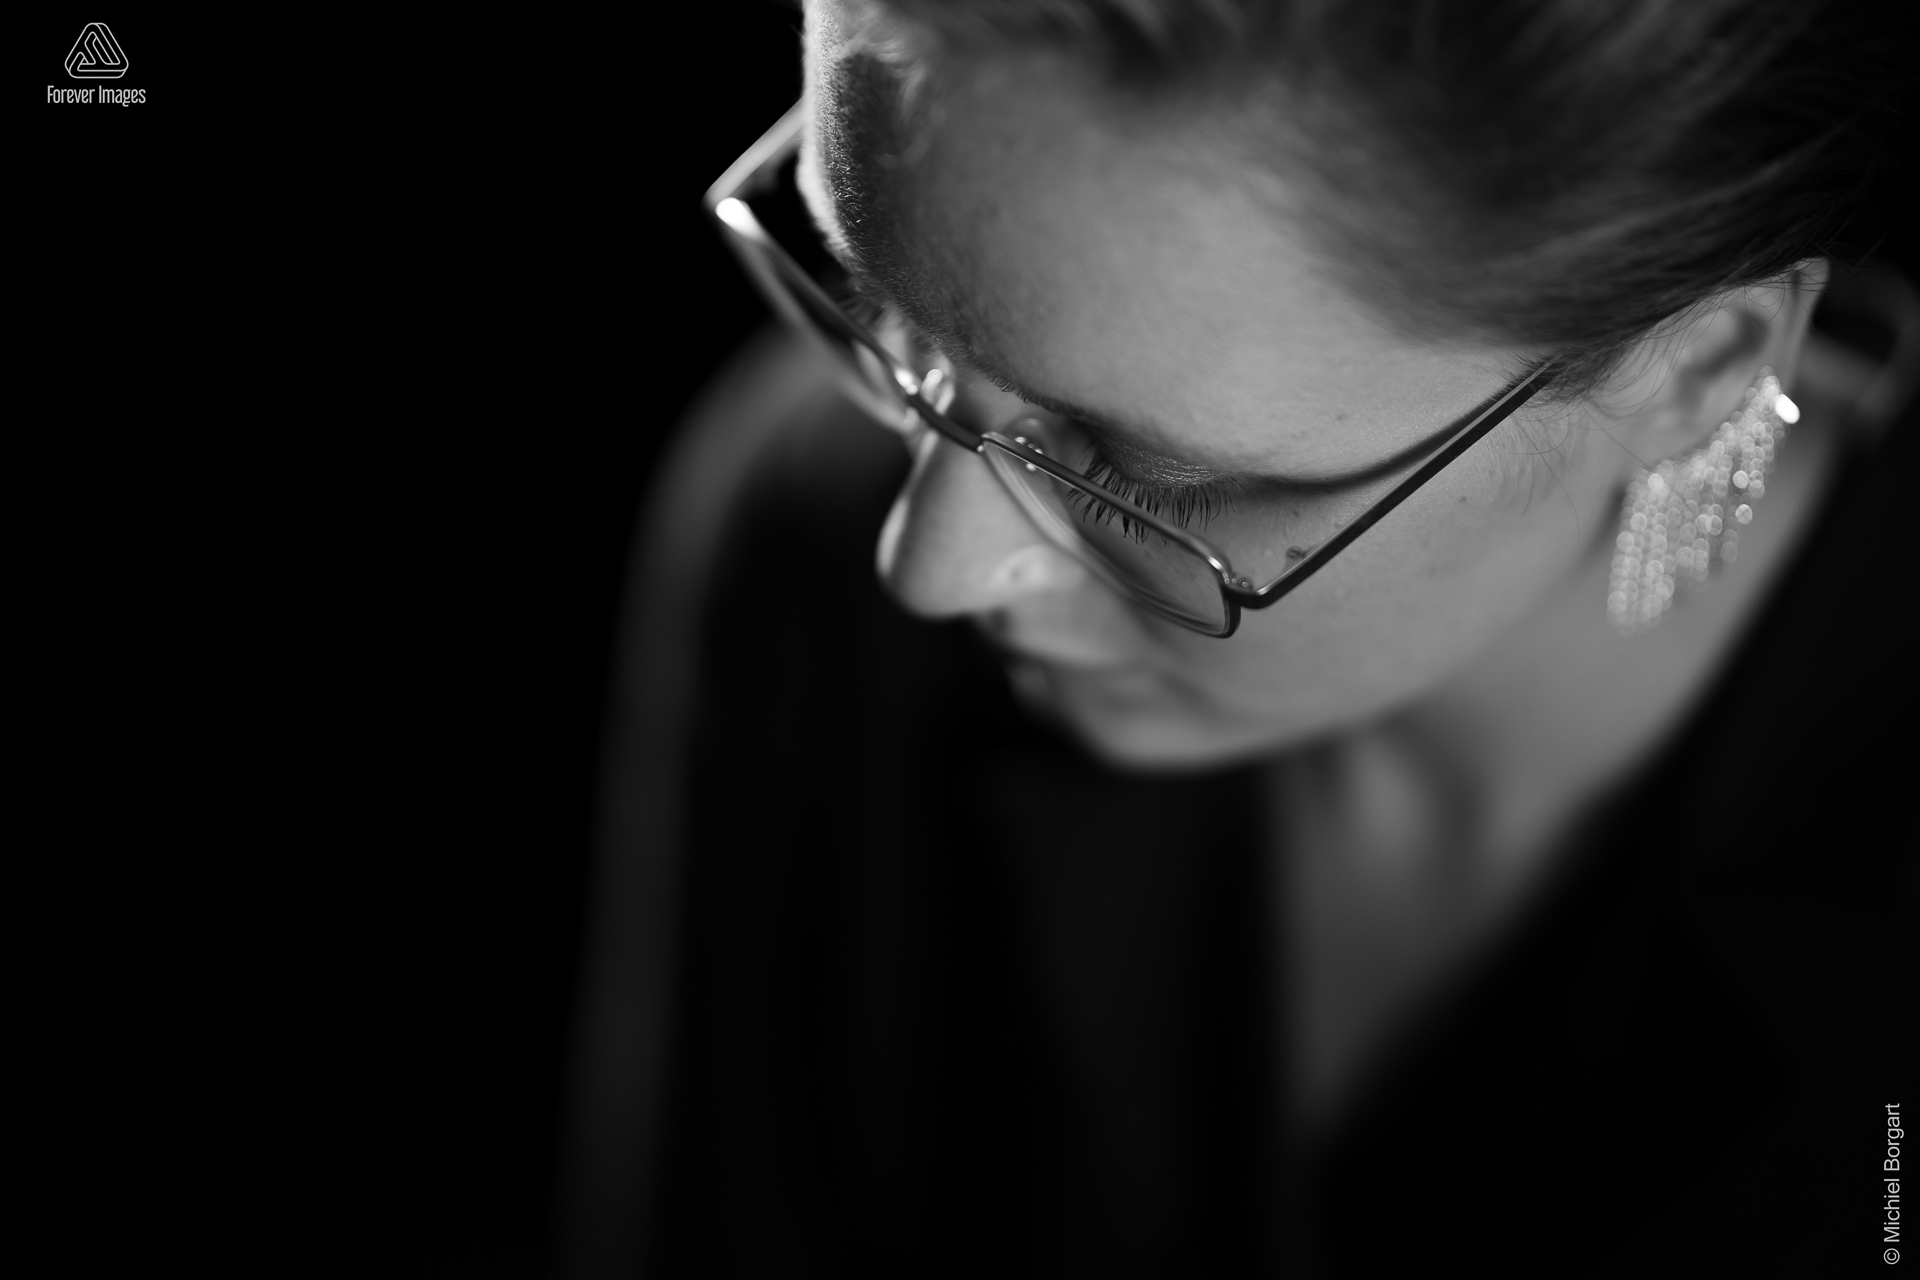 Portrait photo black and white B&W young lady close up from above with glasses and earrings | Carmen | Portrait Photographer Michiel Borgart - Forever Images.